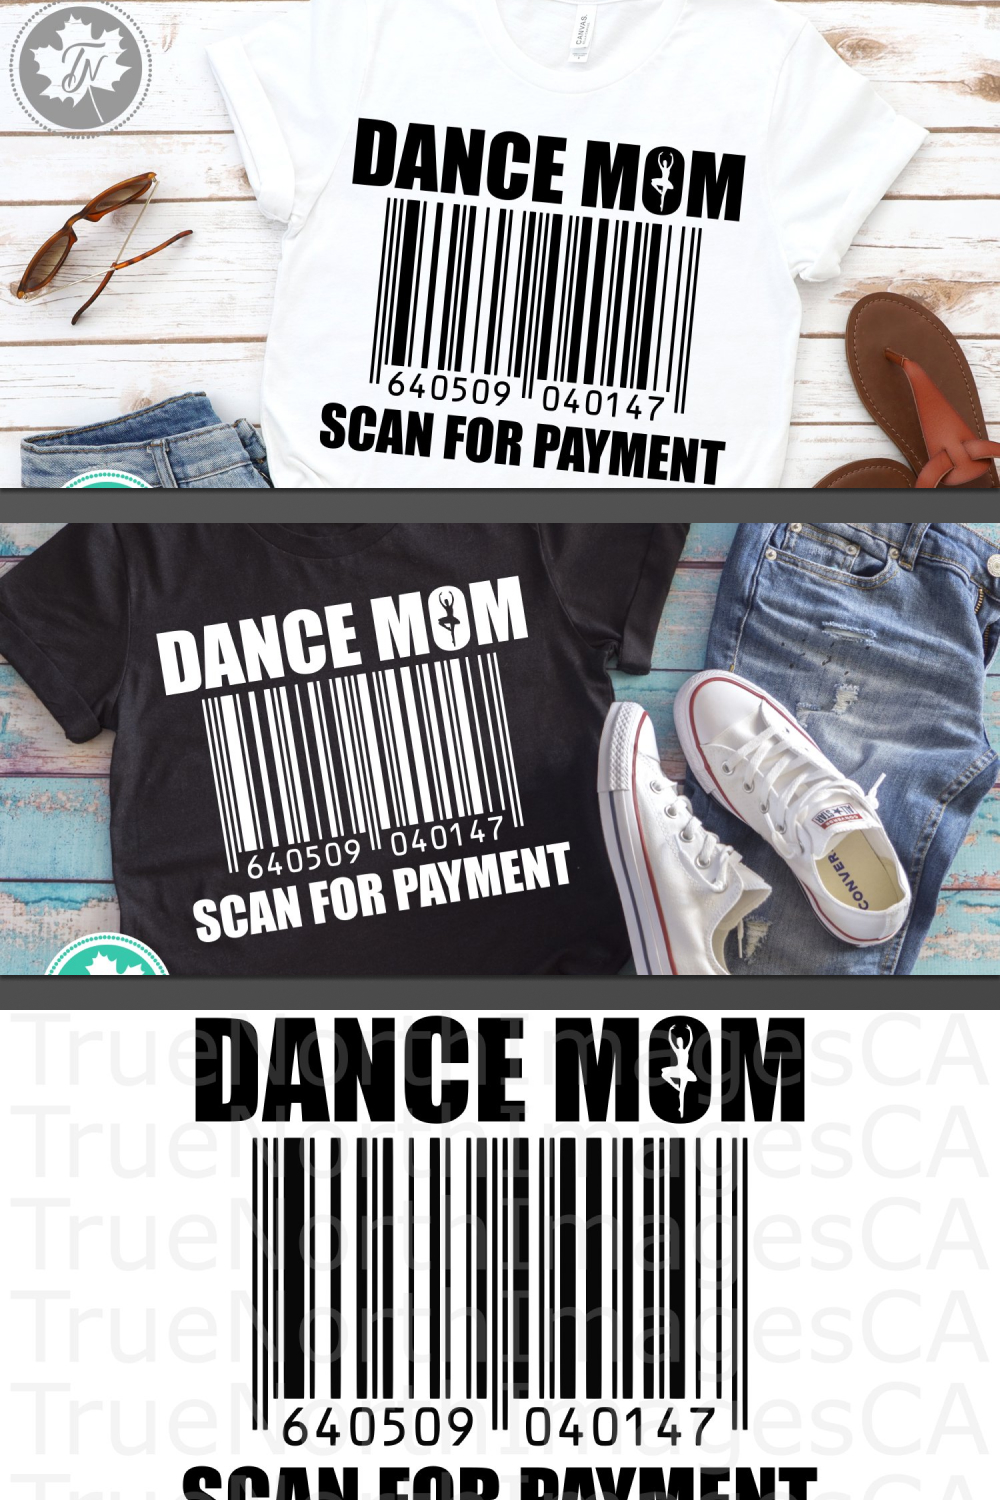 Different t-shirts with barcodes are suggested.